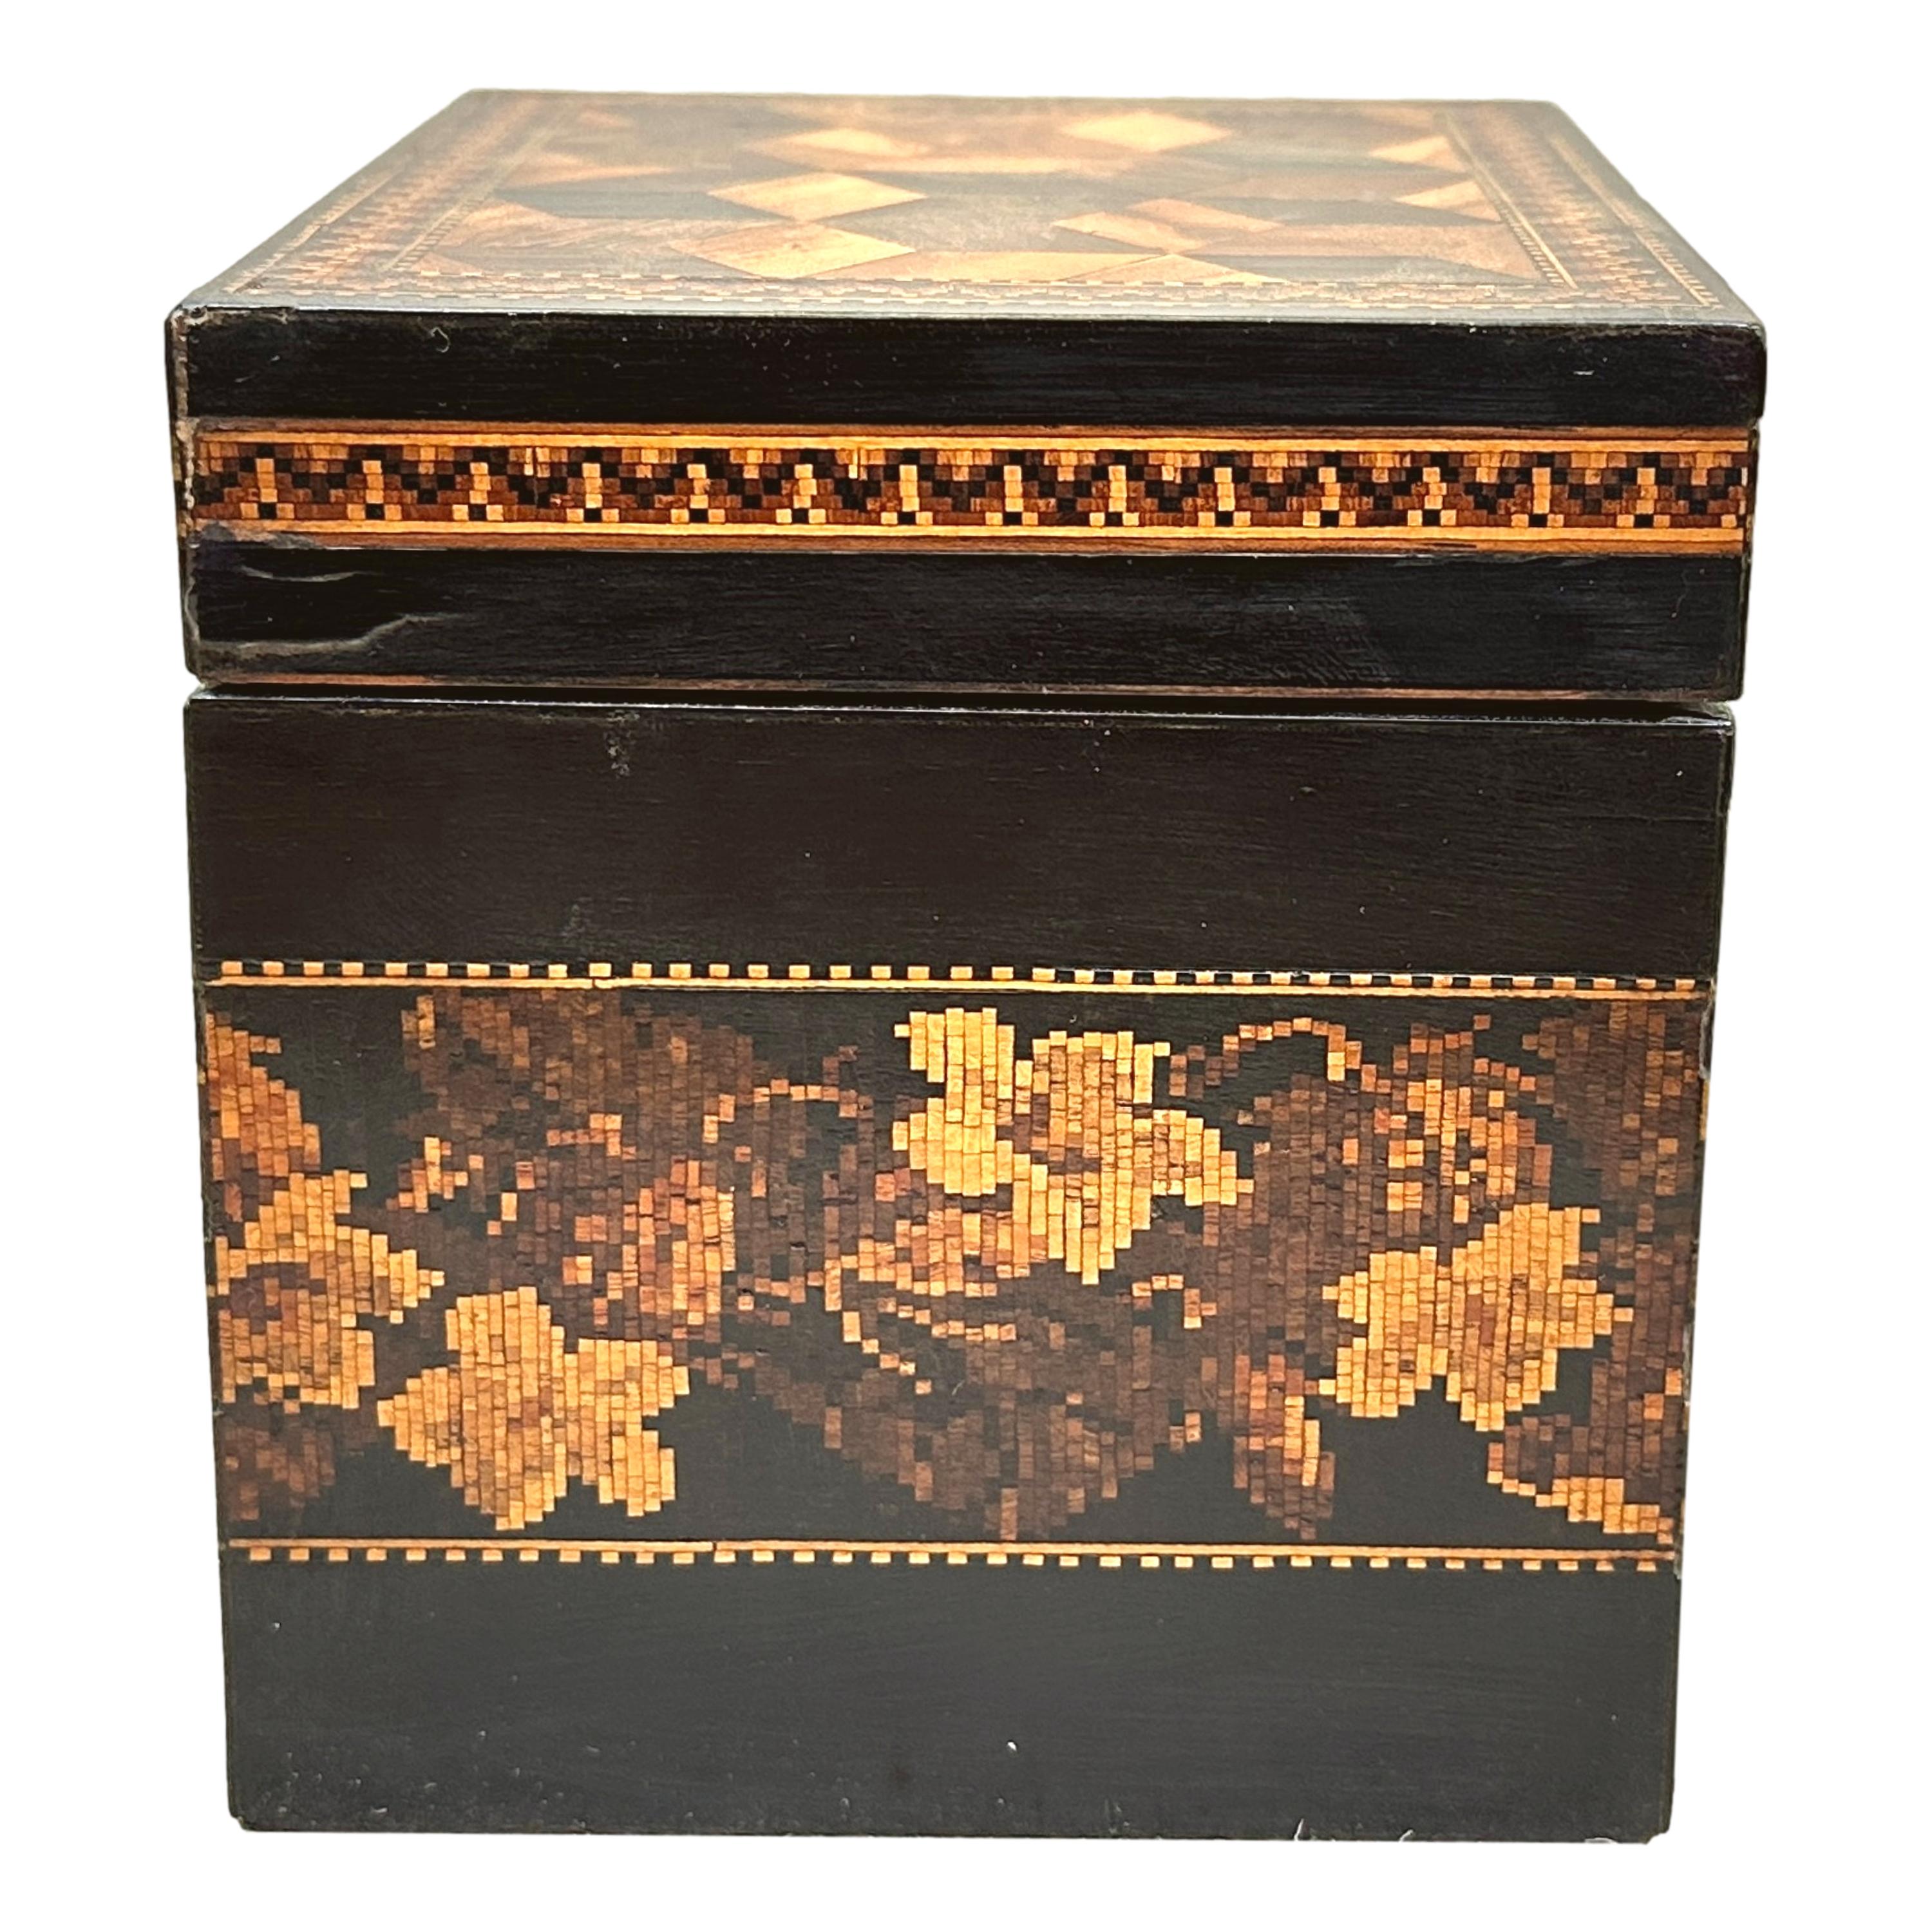 A Charming 19th Century Tunbridge Ware Tea Caddy With Attractive Floral Band To Main Body And Parquetry Perspective Cubes To Hinged Lid Enclosing Lidded Interior.


Tea was an extremely valuable commodity throughout the course of the 18th and 19th